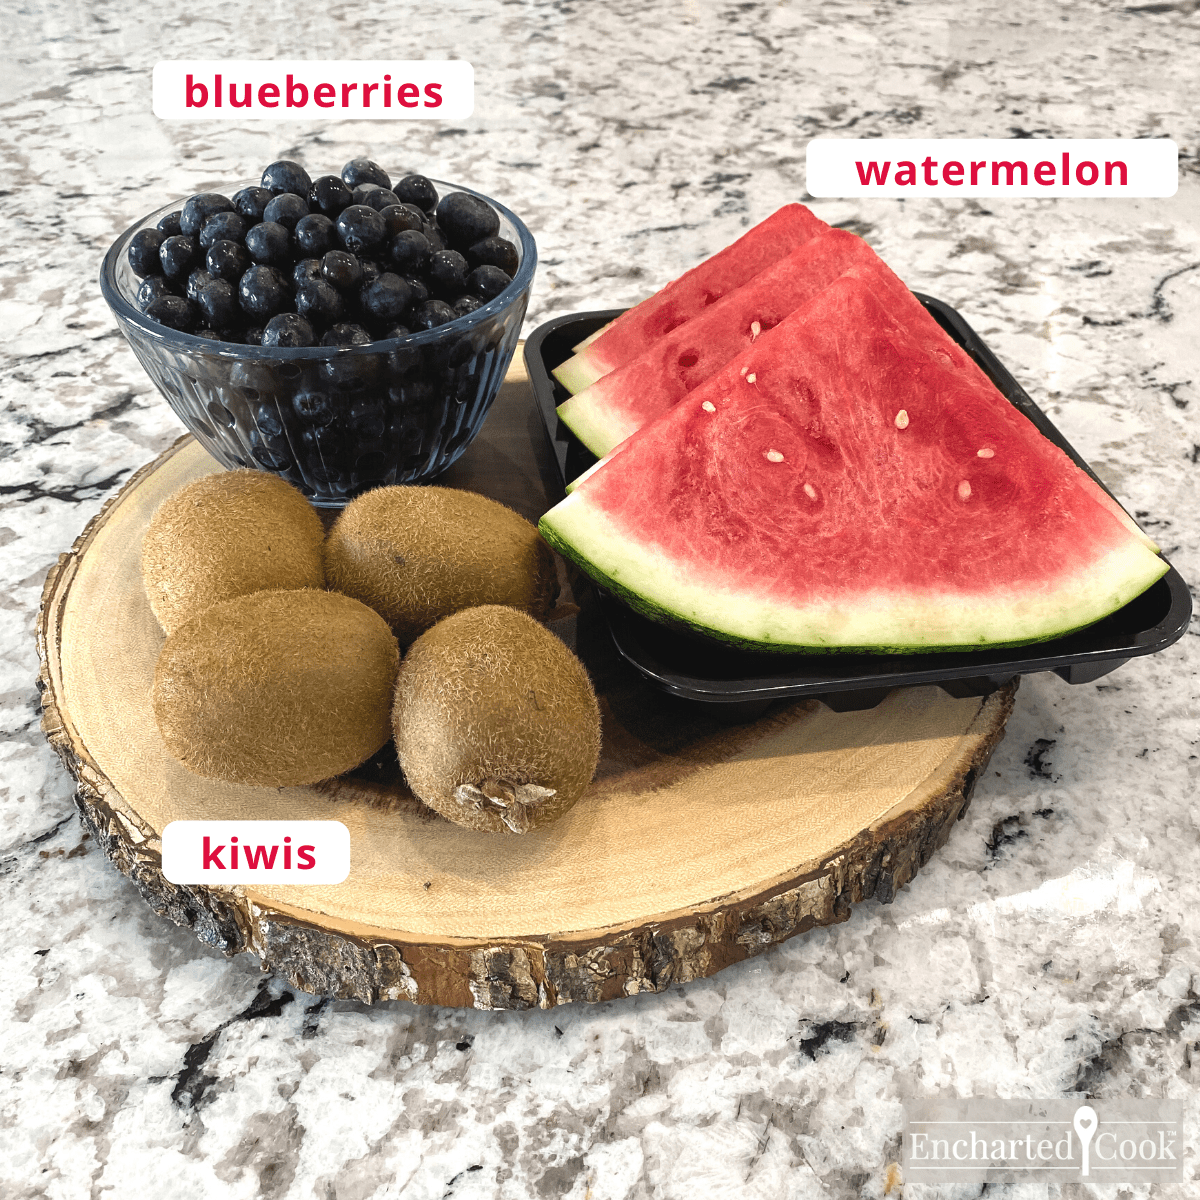 Fruit ingredients, clockwise from top right: watermelon, kiwis, and blueberries.